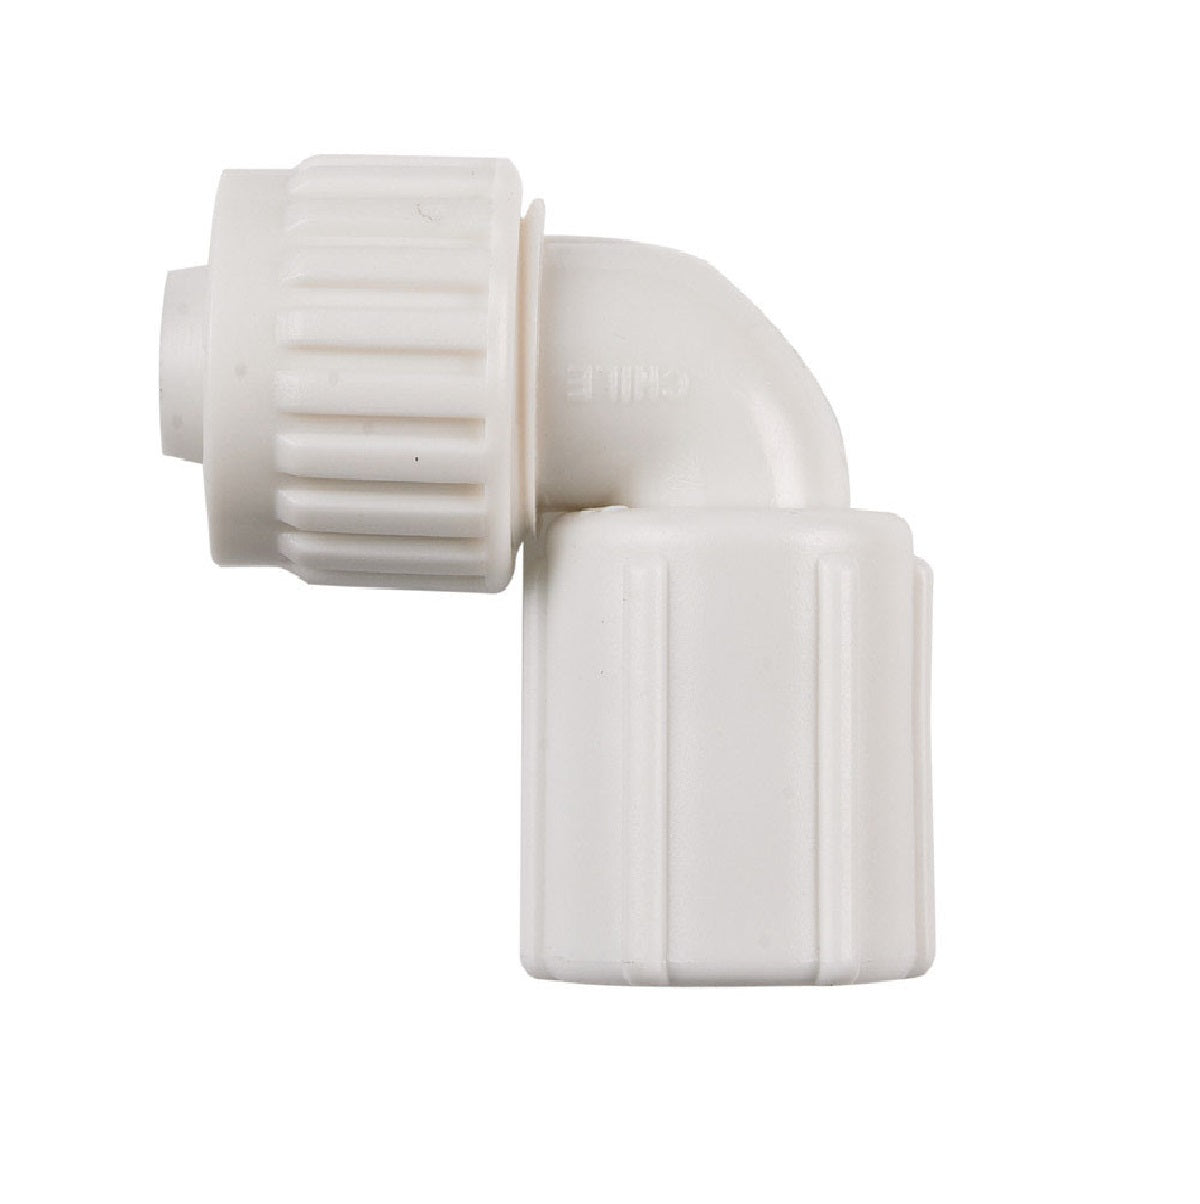 buy pex compression fittings bulk at cheap rate in bulk. wholesale & retail plumbing goods & supplies store. home décor ideas, maintenance, repair replacement parts